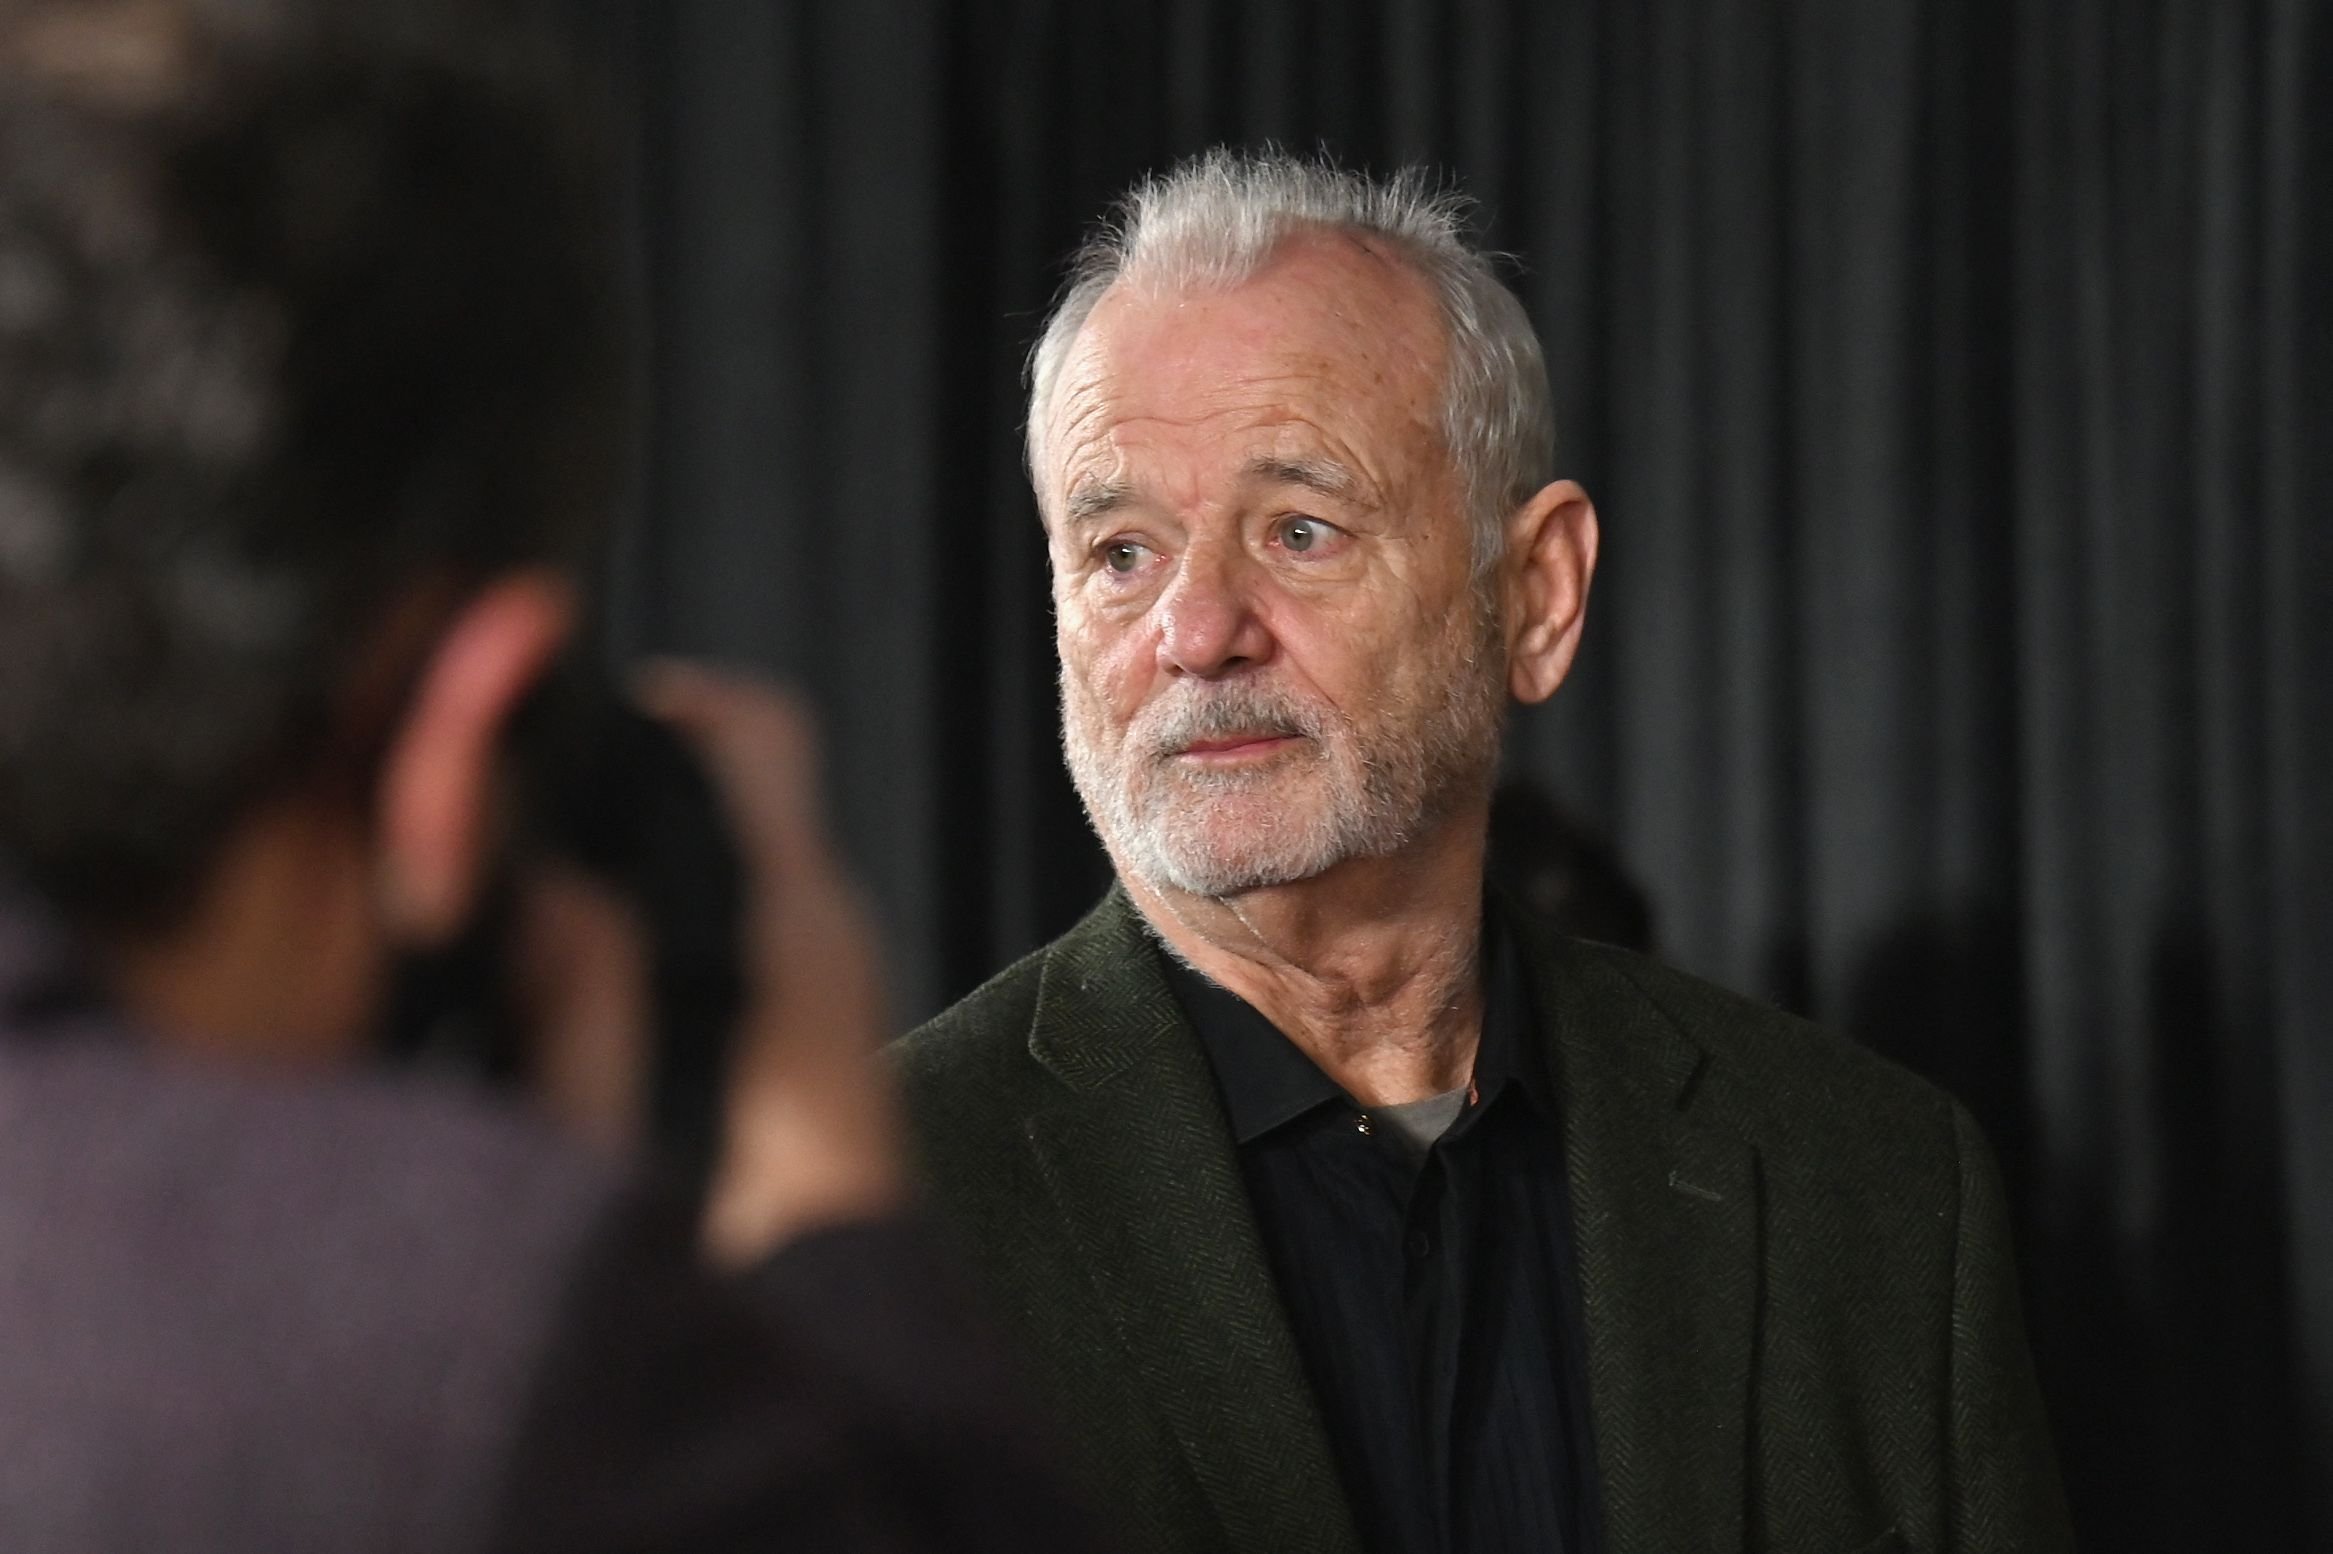 Bill Murray during the "Ghostbusters: Afterlife" New York premiere at AMC Lincoln Square on November 15, 2021, in New York City. | Source: Getty Images